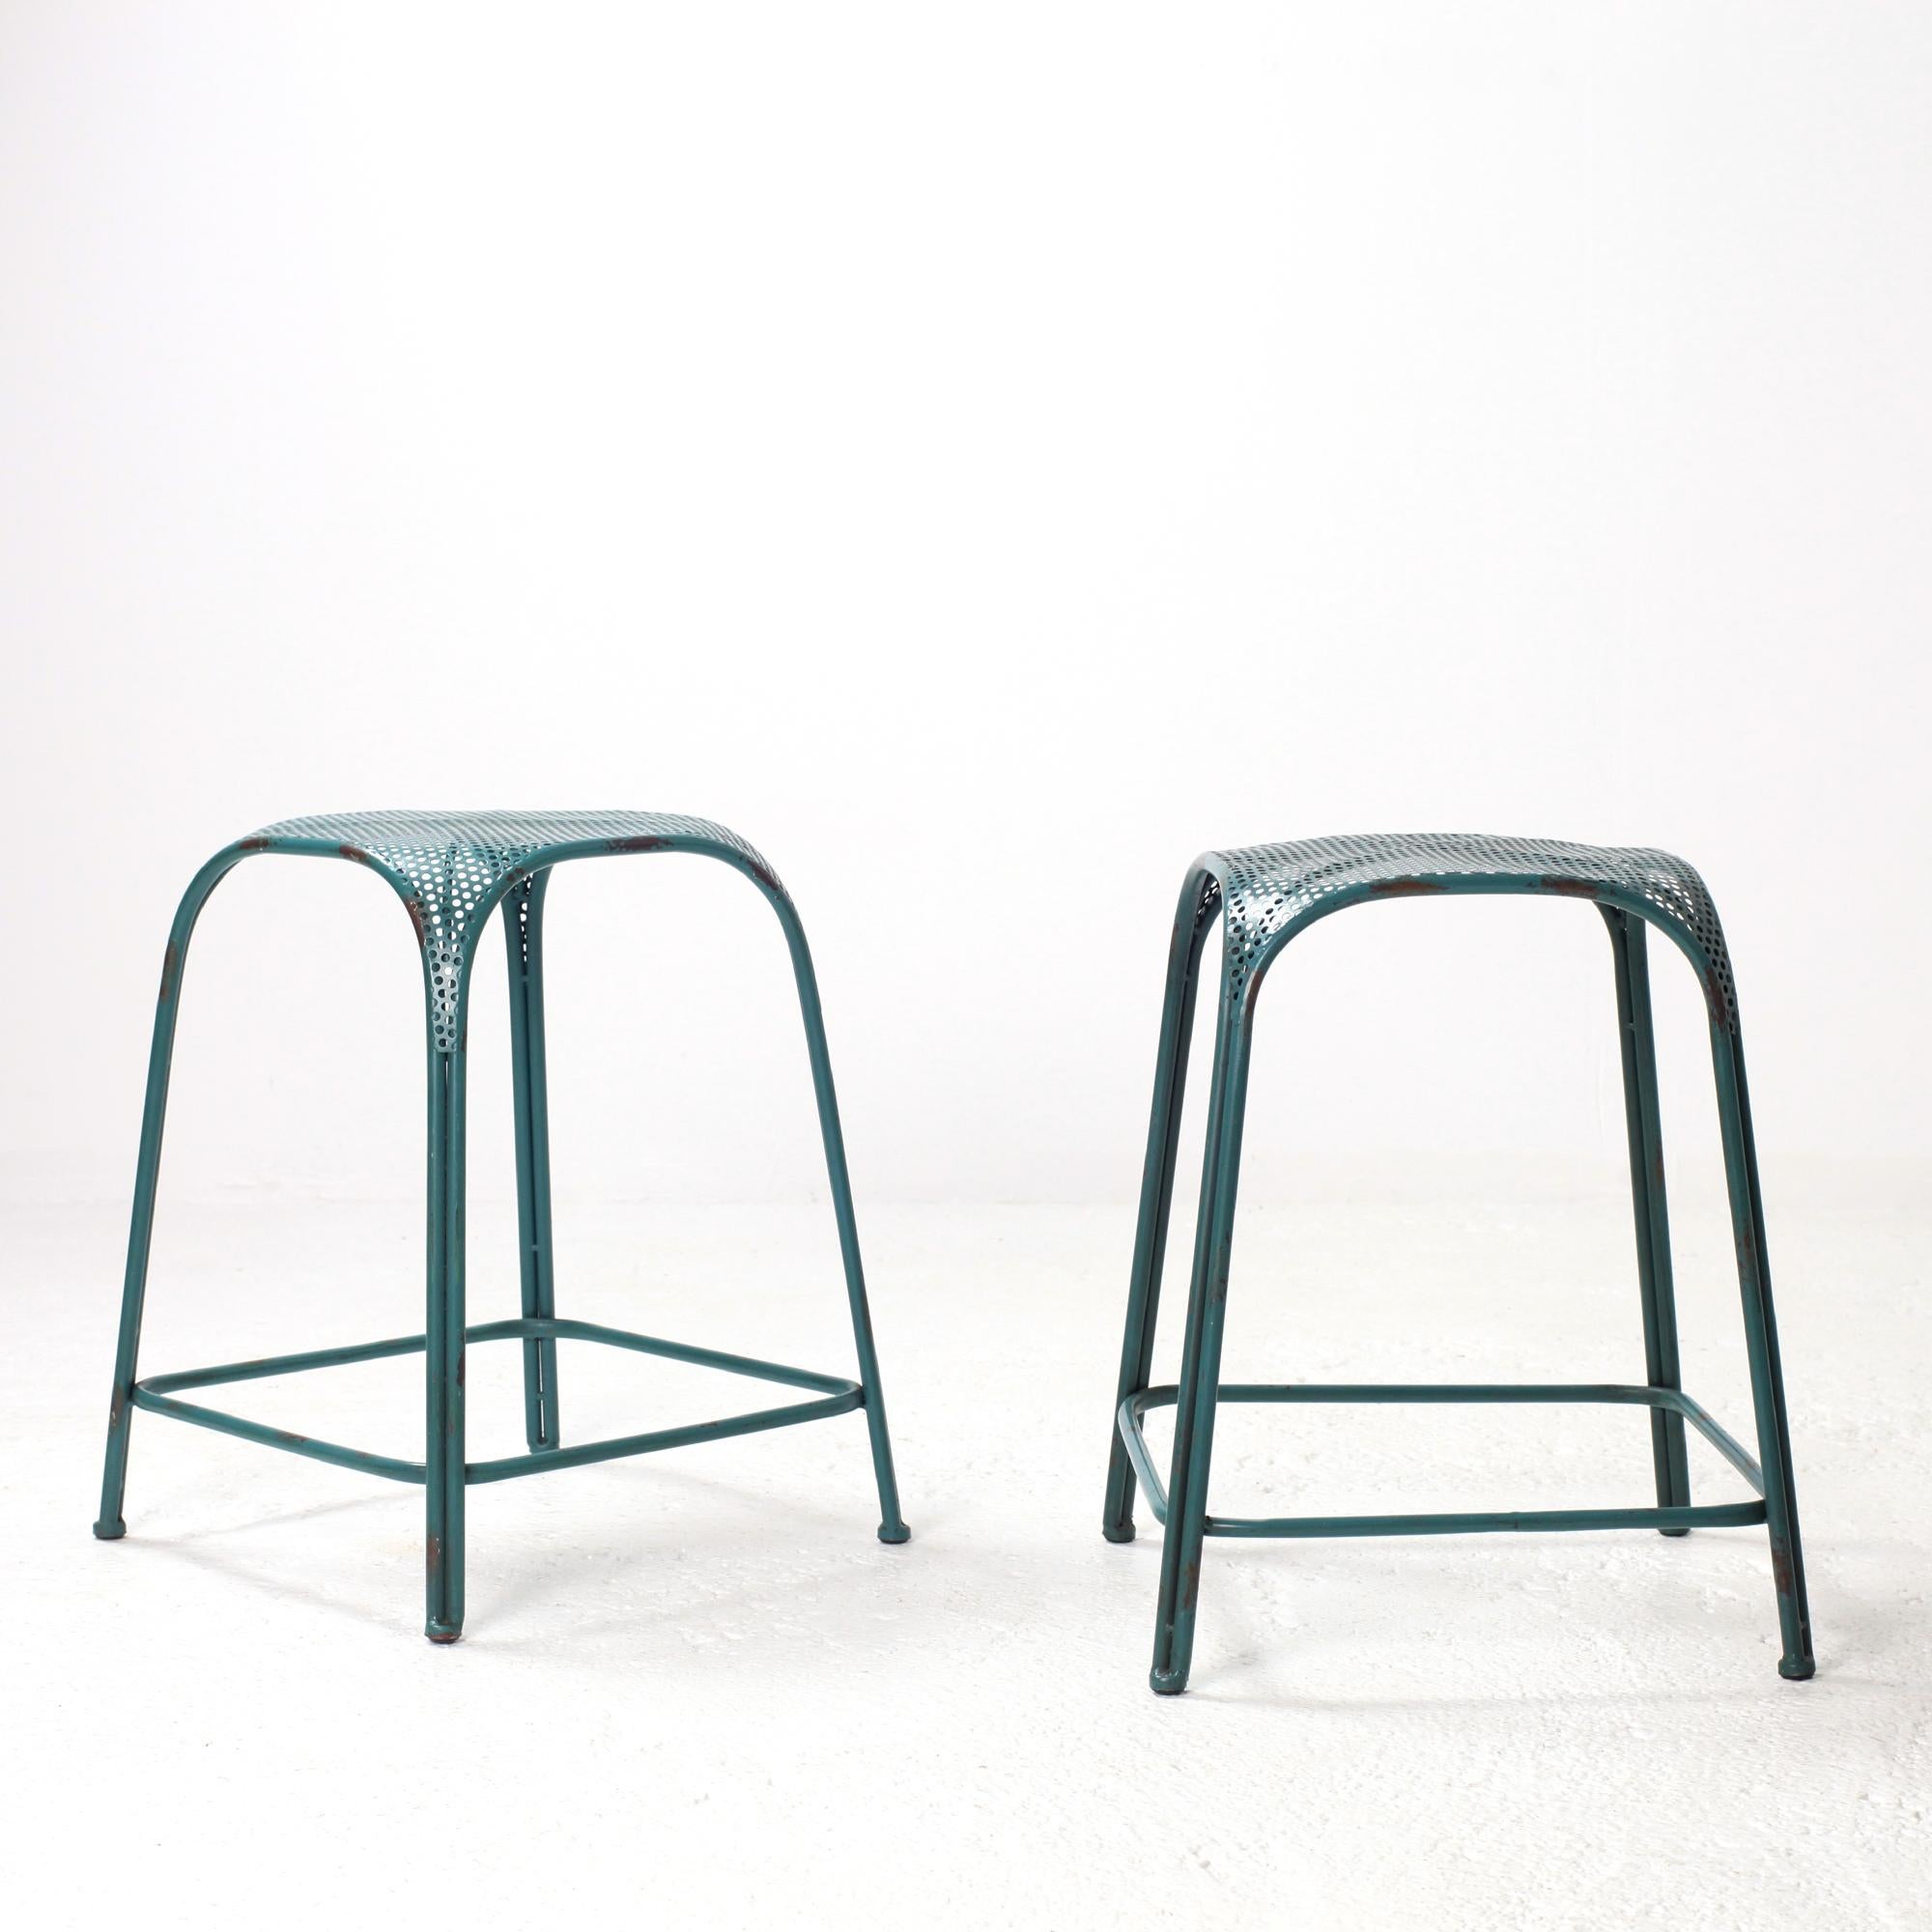 Mid-Century Modern Pair of Perforated Steel Seat Italian Stool In the Style of Mategot 1960s